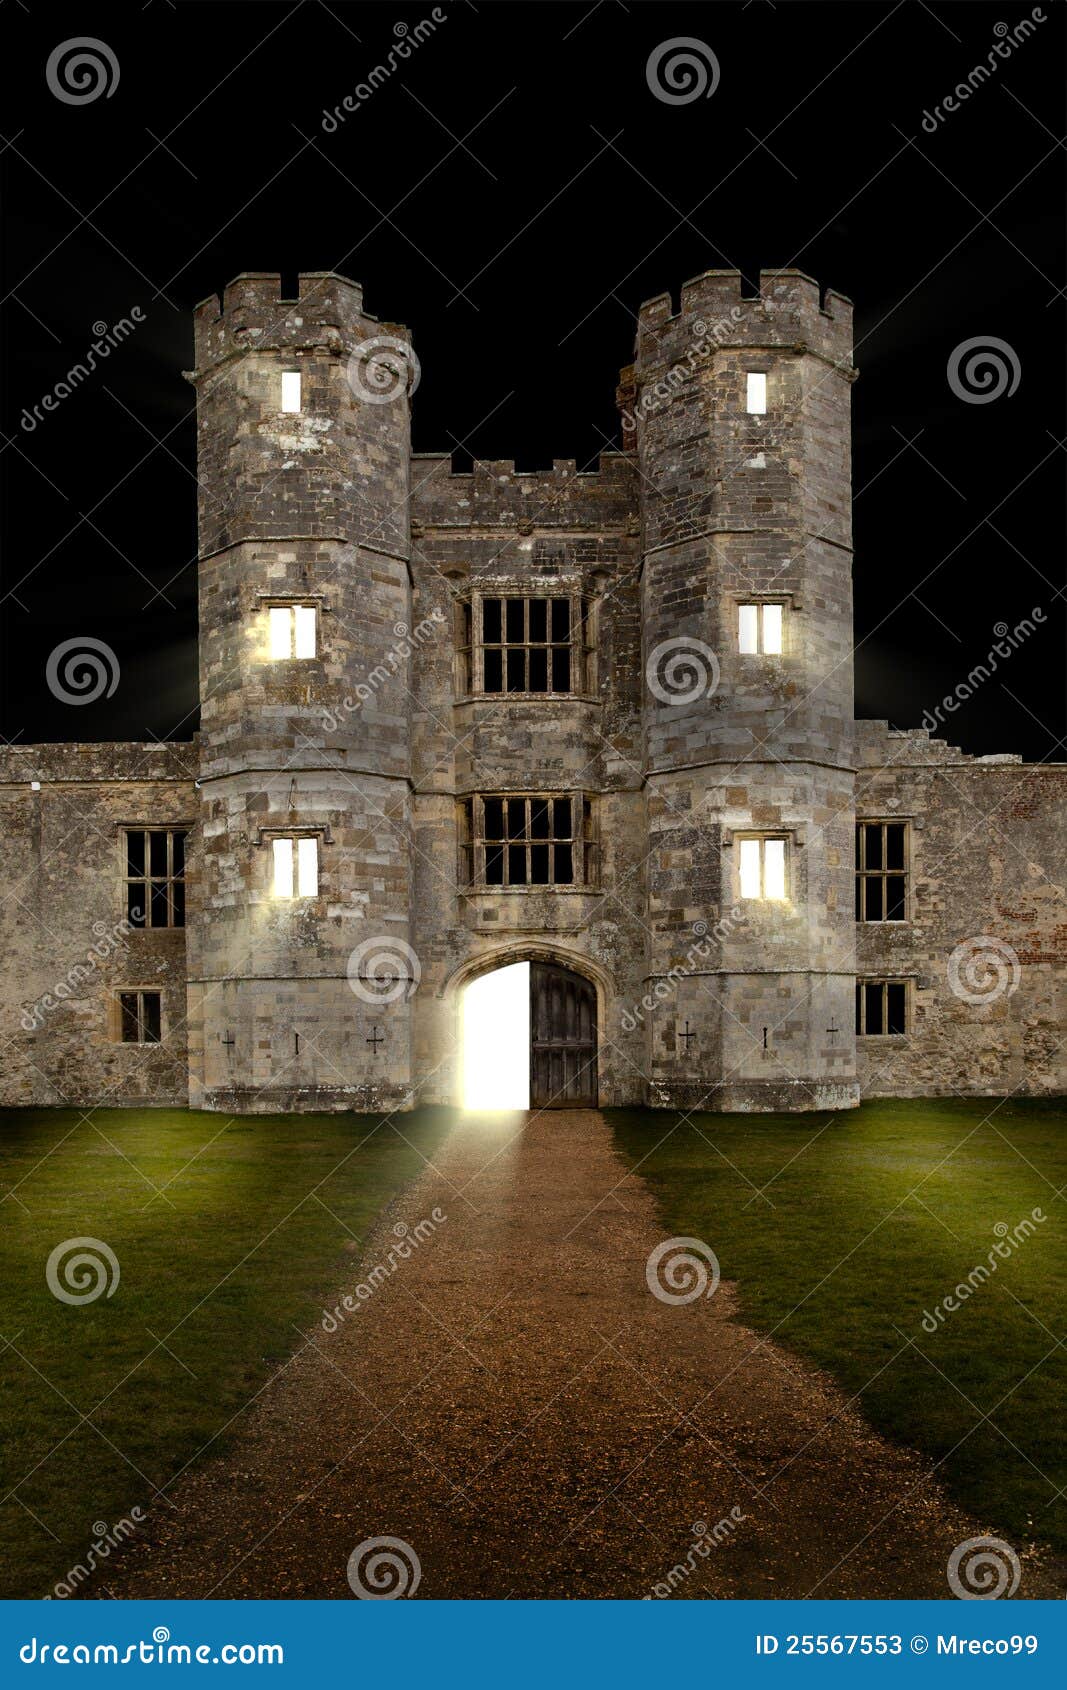 Castle At Night With Door Opening Stock Image Image of black, historic 25567553